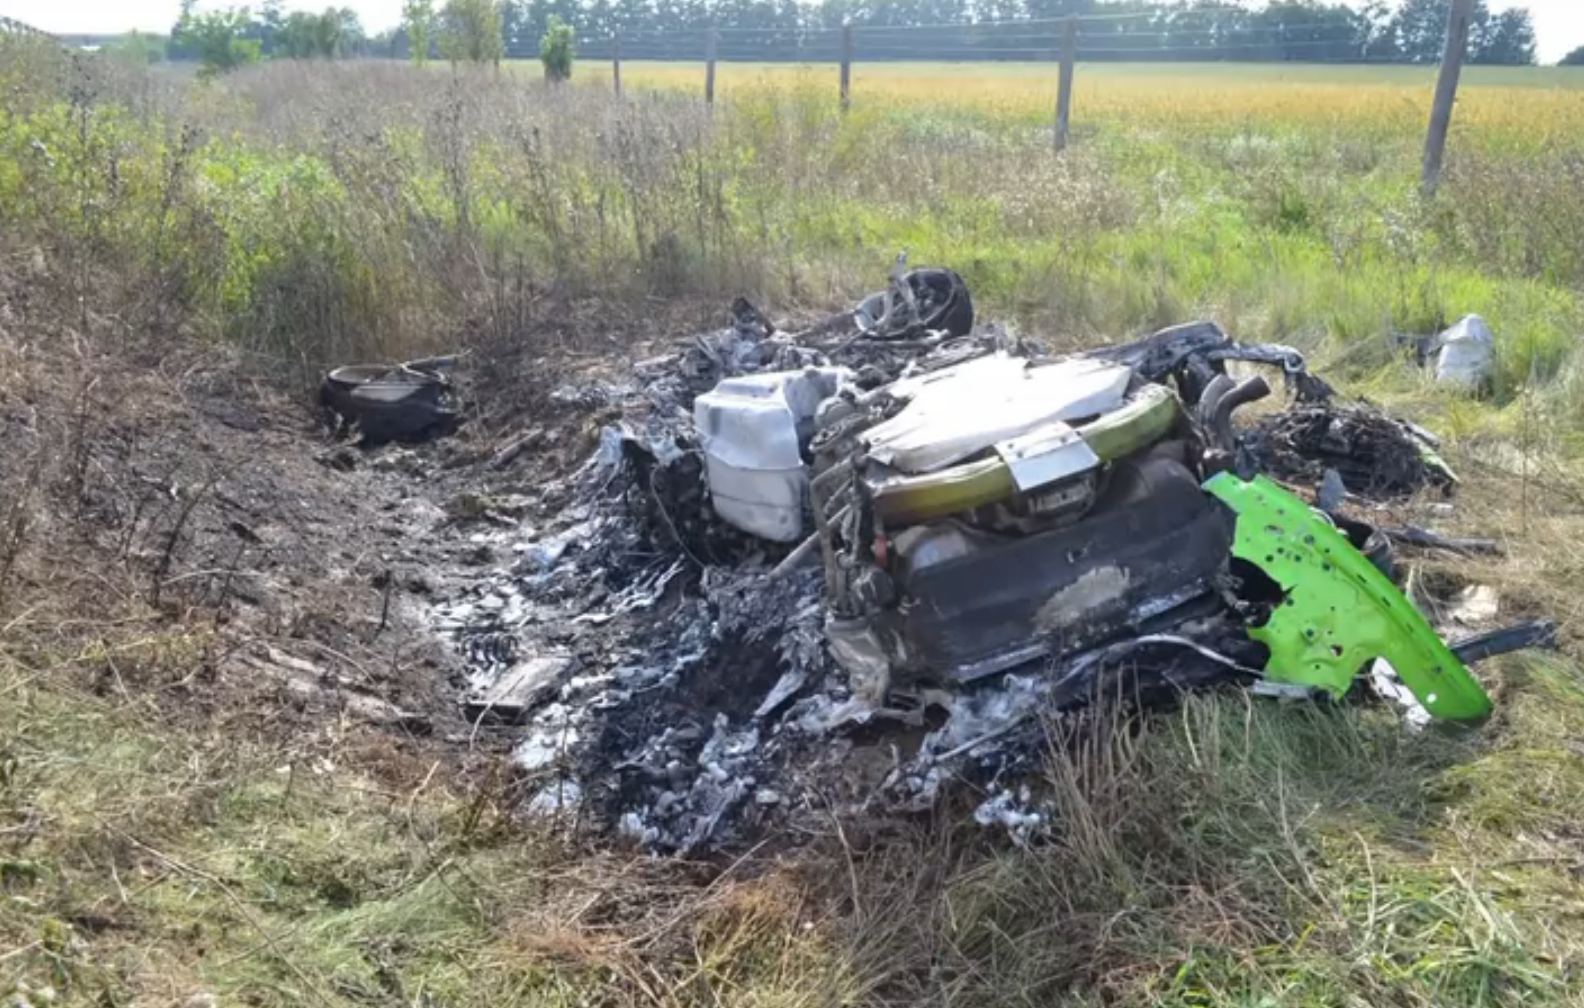 The car was travelling at nearly 210mph when it crashed